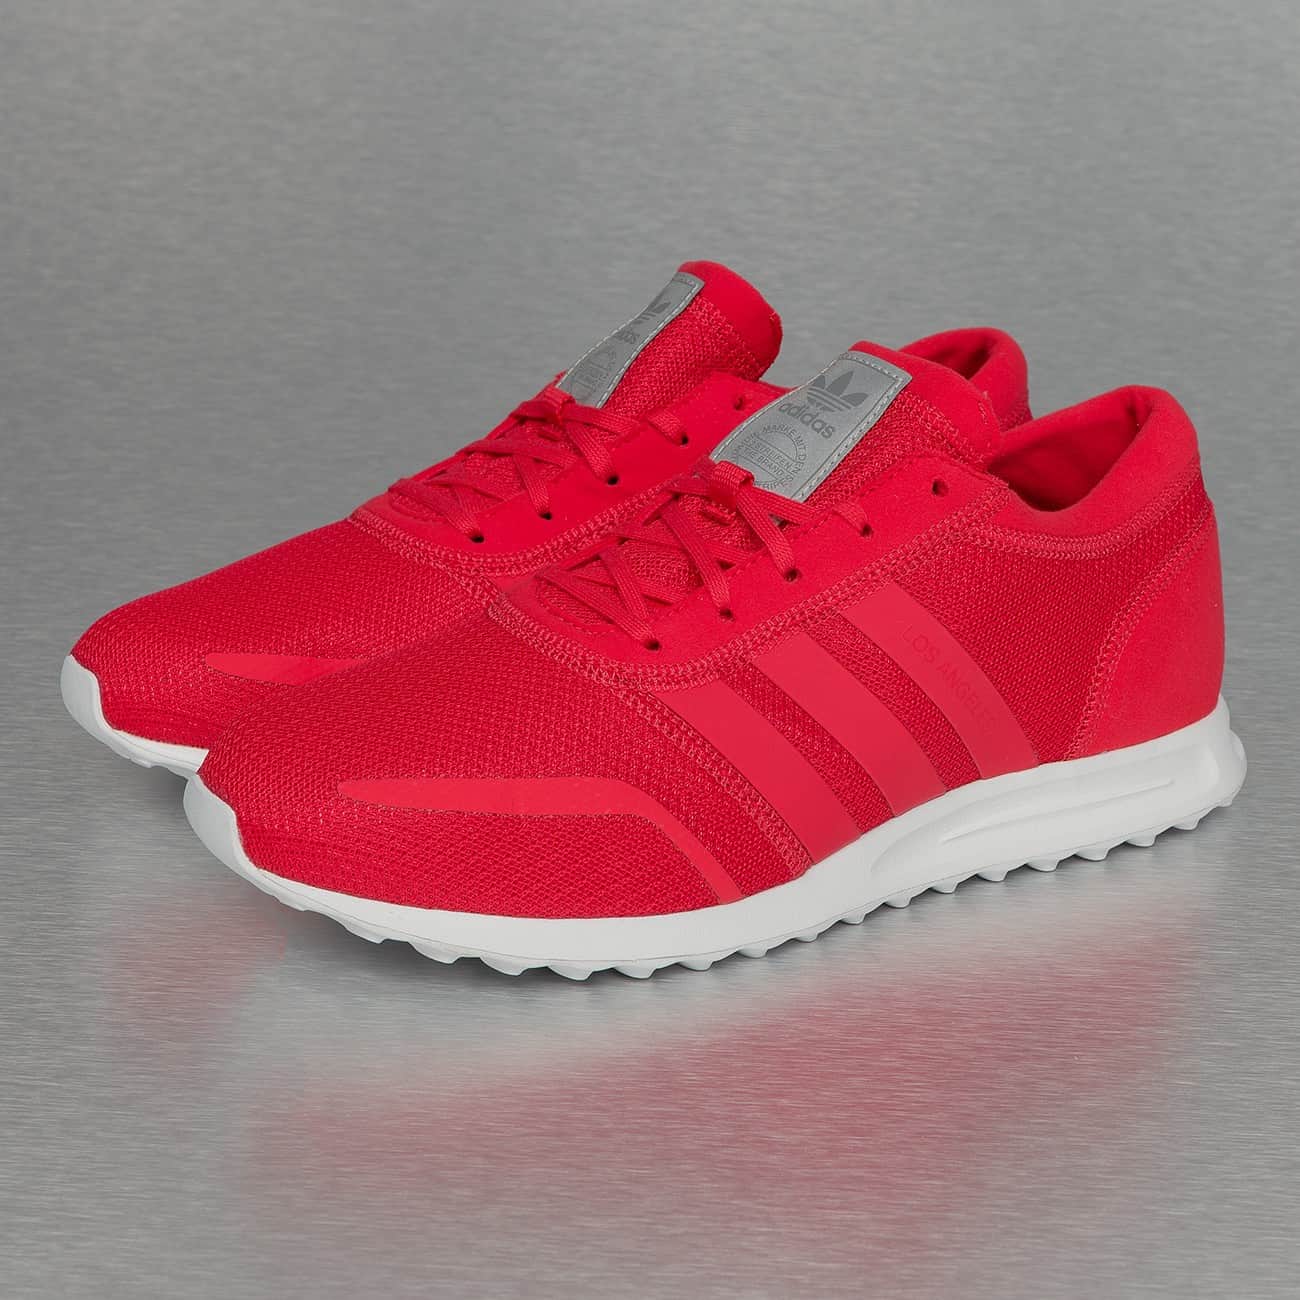 adidas-los-angeles-sneakers-ray-red-ray-red-white